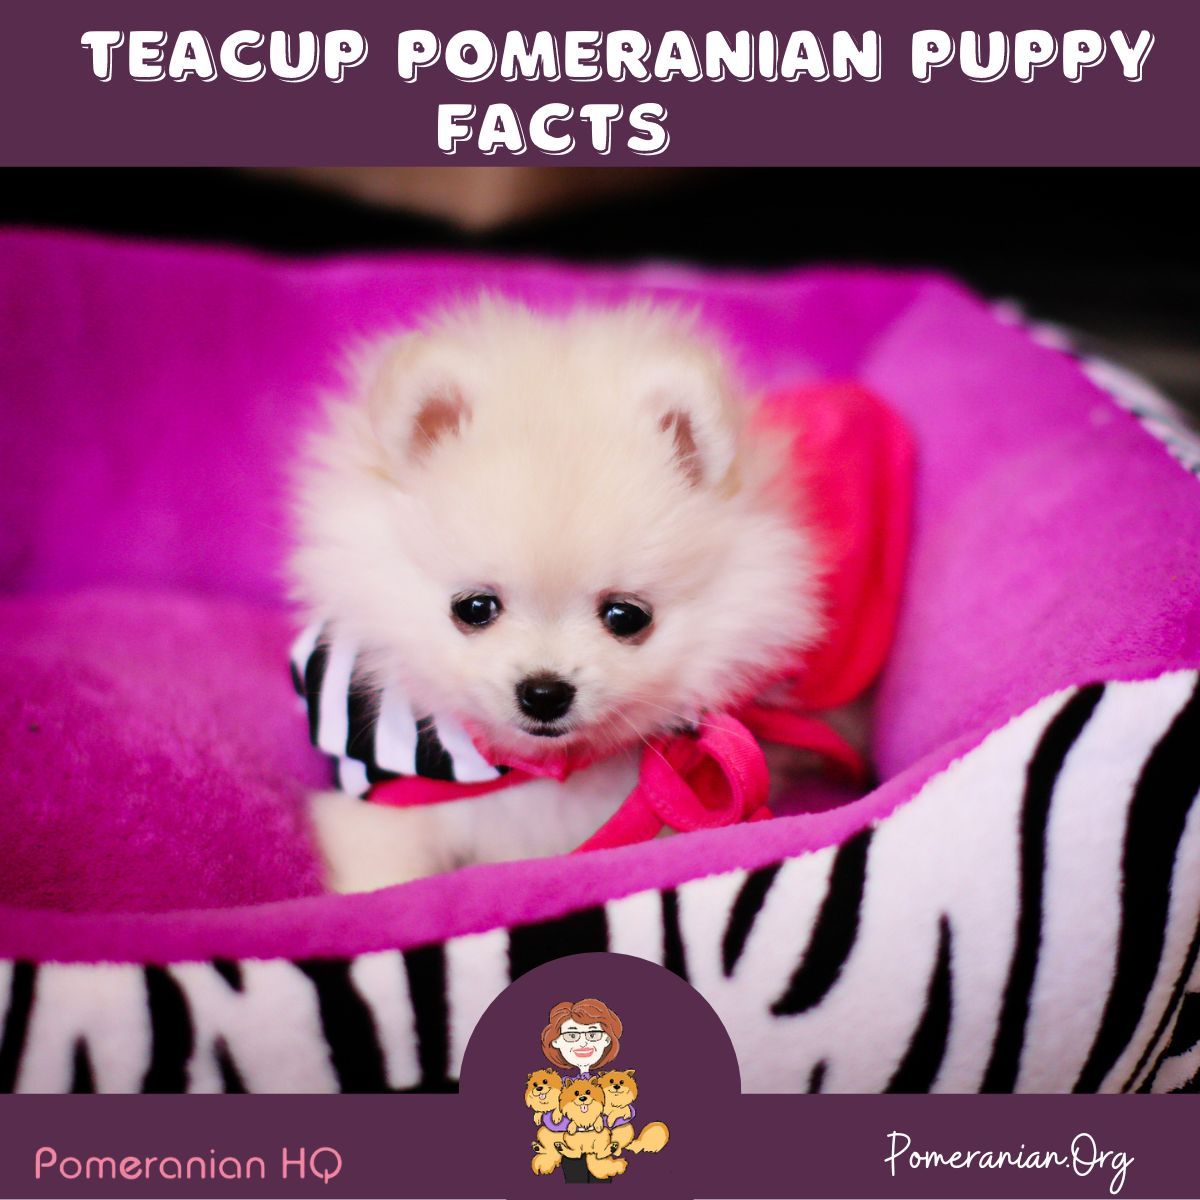 Teacup Pomeranian Puppy Facts